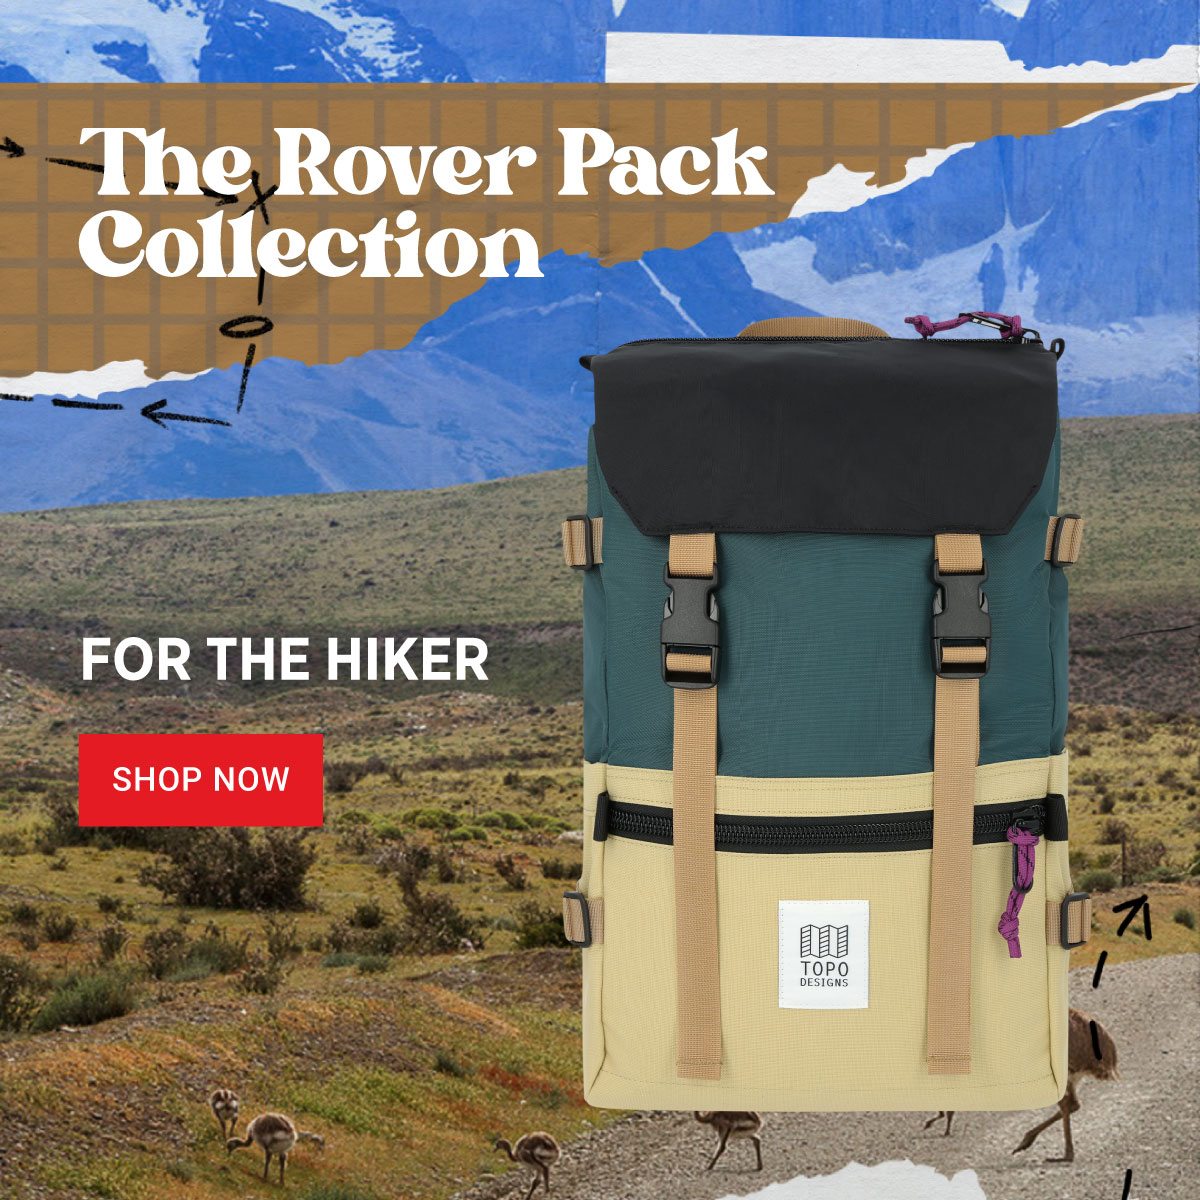 THE ROVER PACK COLLECTION - FOR THE HIKER